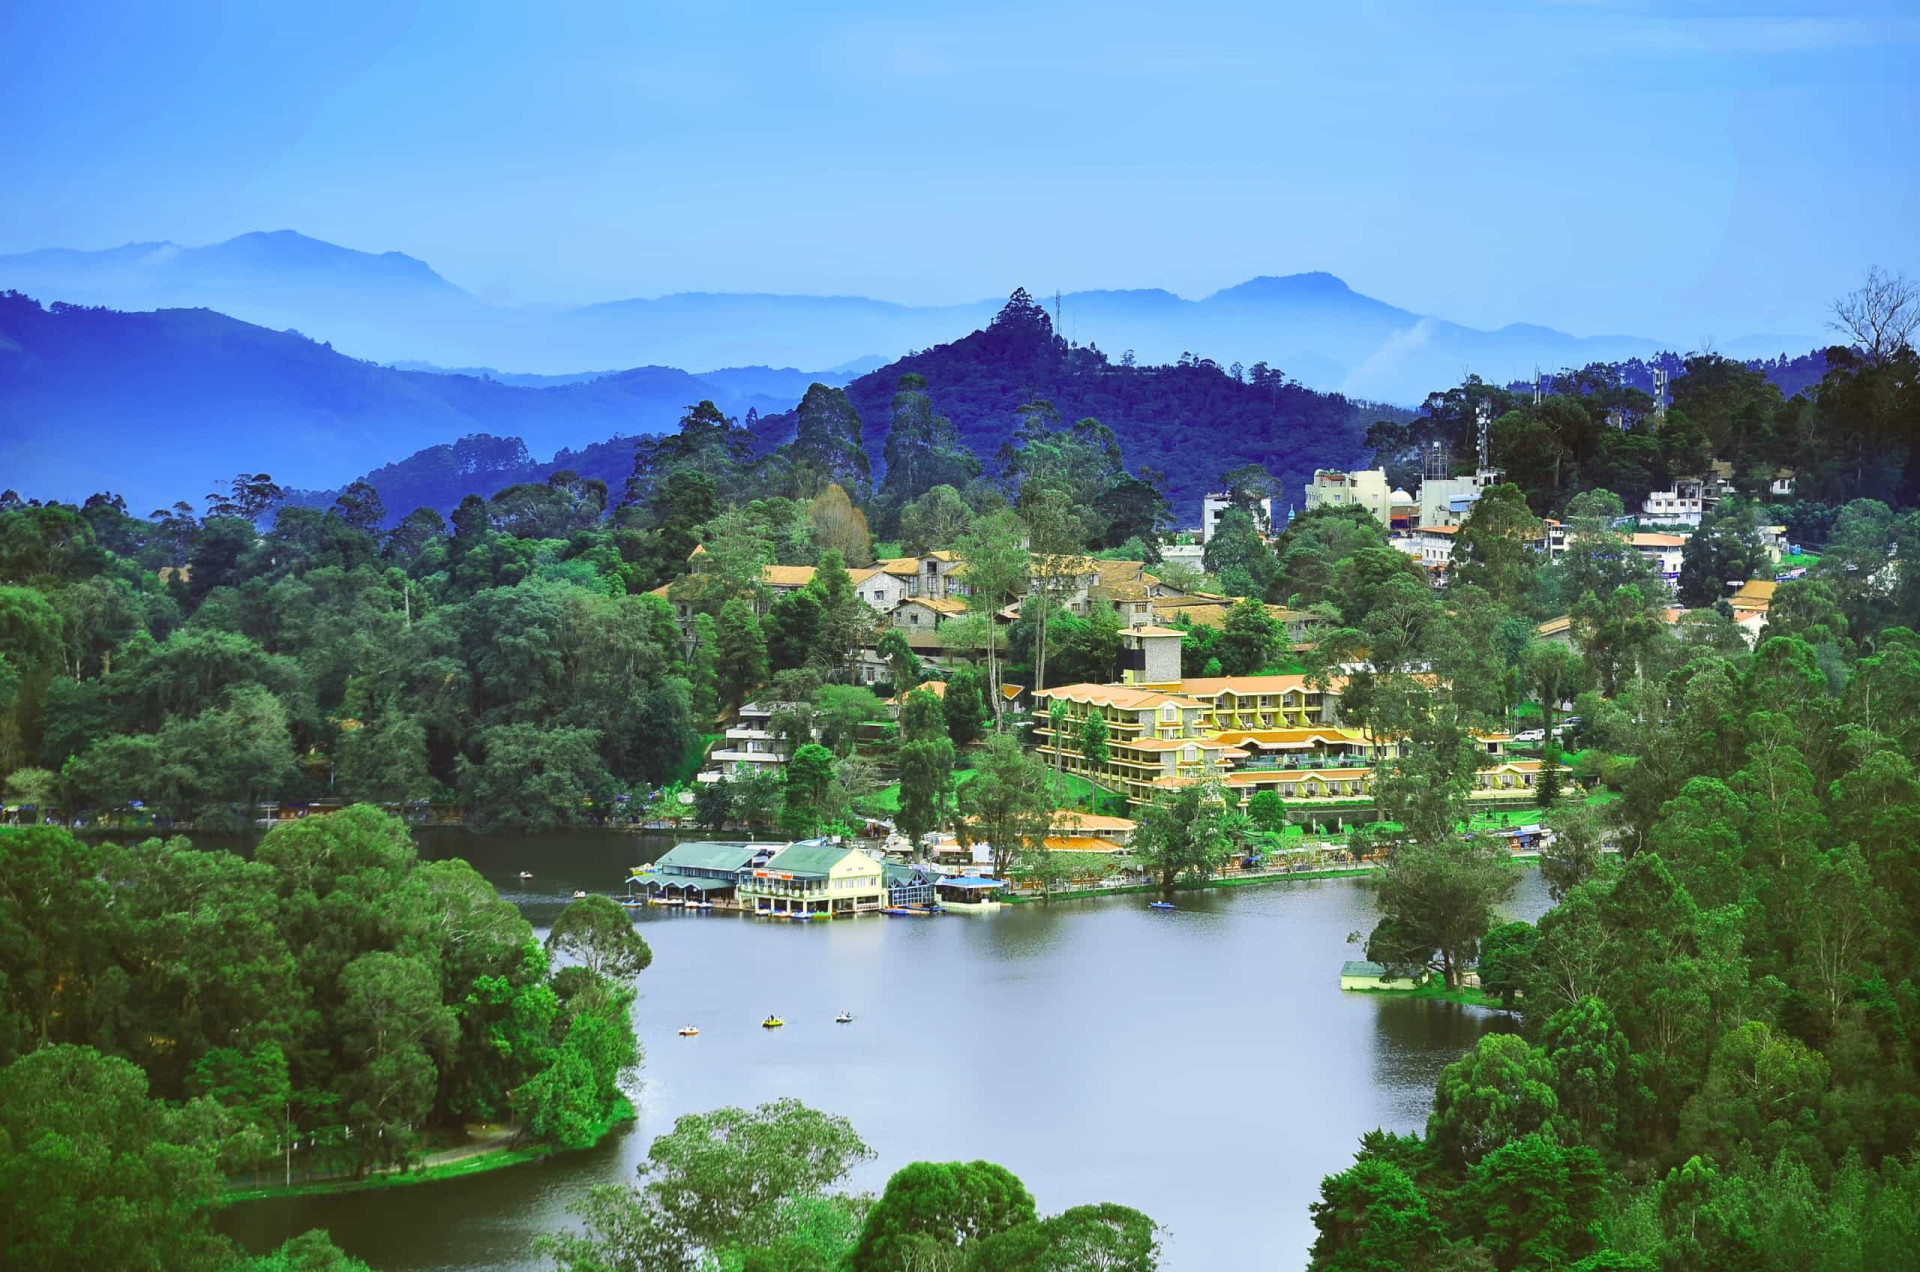 <p>Its name in the Tamil language means "The Gift of the Forest," and Kodaikanal is indeed one of the most attractive hill stations found in India. It's located in Dindigul district in the state of Tamil Nadu, and is blessed with panoramic views of velvety green hills and a lake that's used for boating.</p>